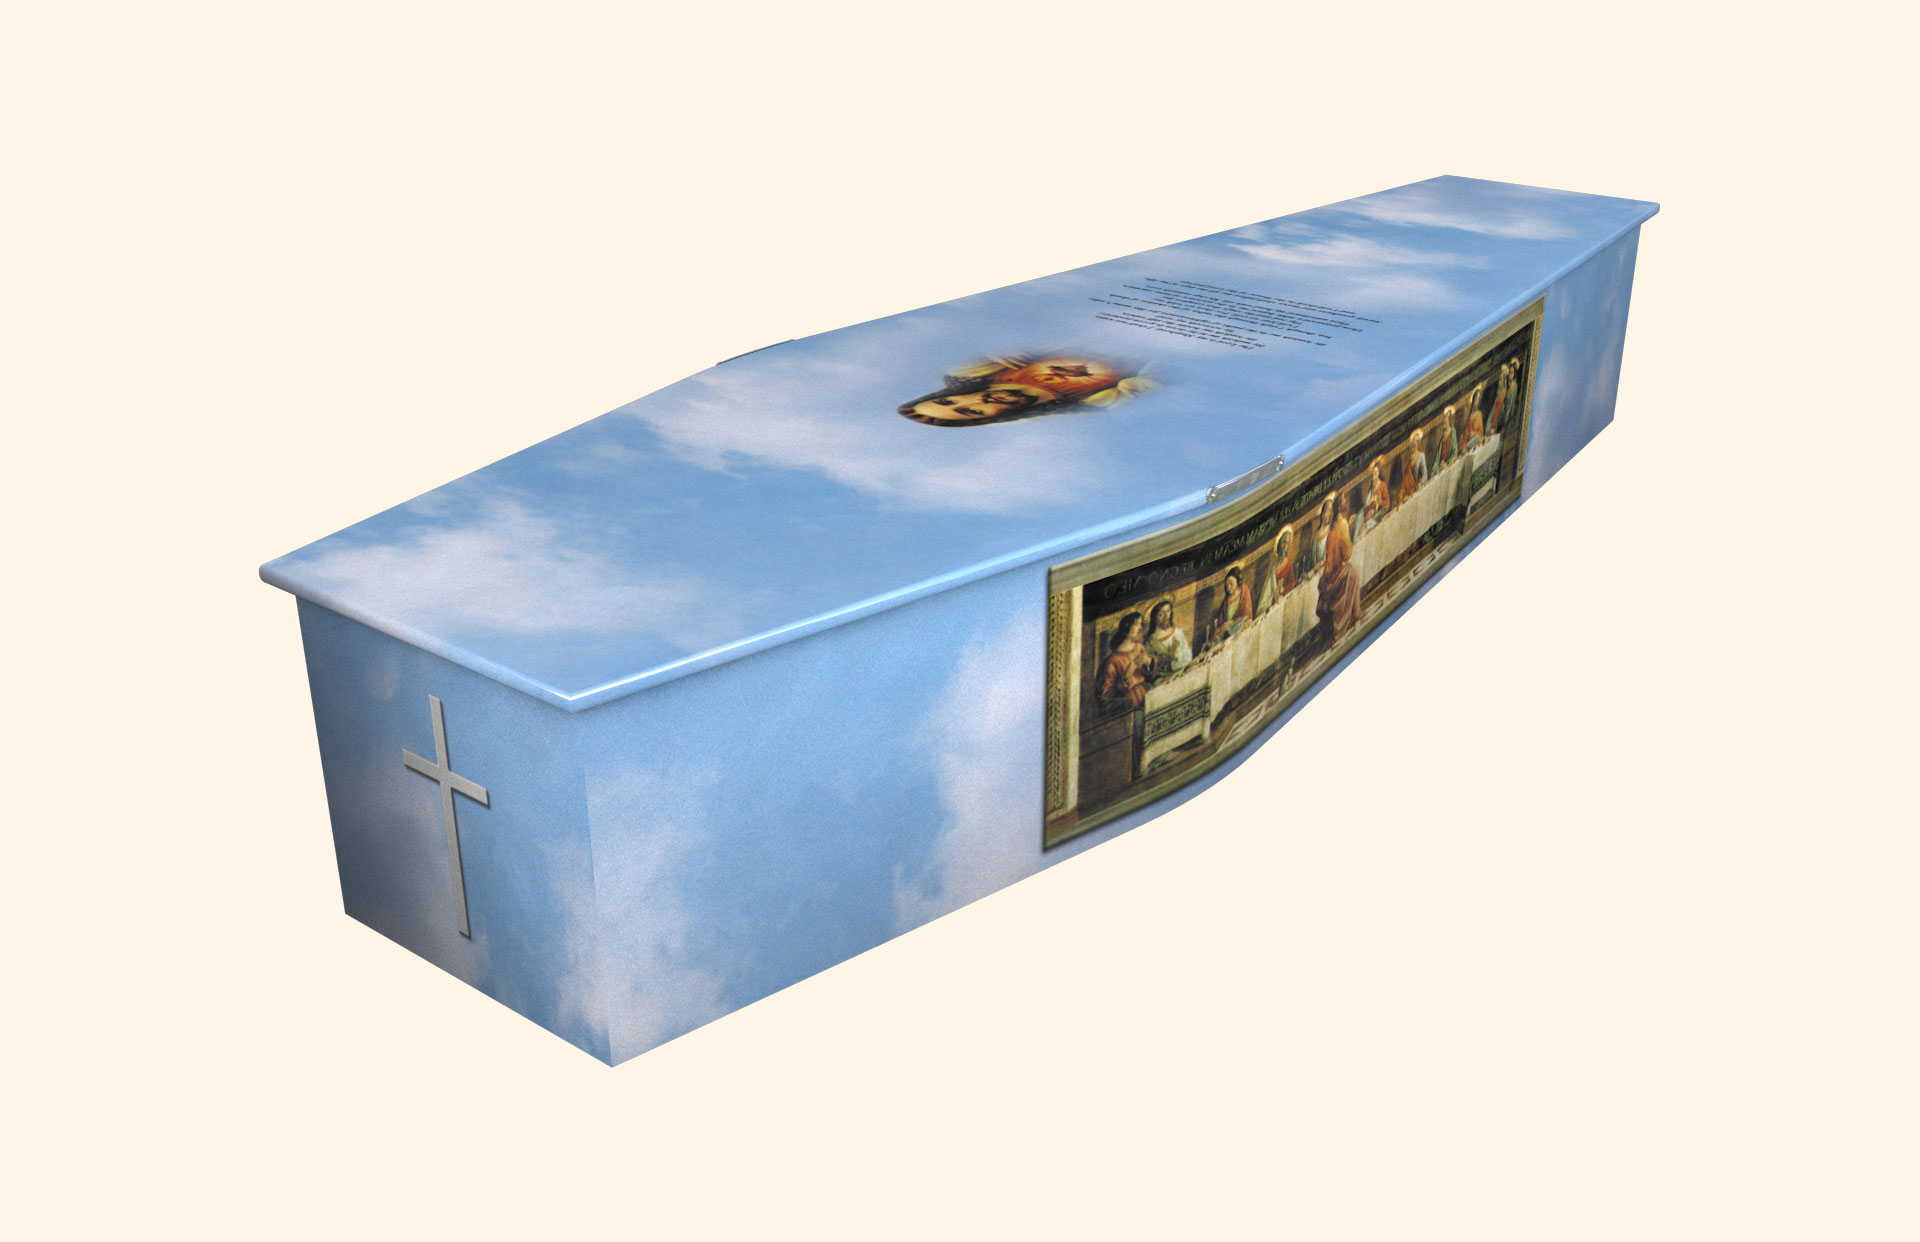 Last Supper 23rd Psalm design on a traditional coffin